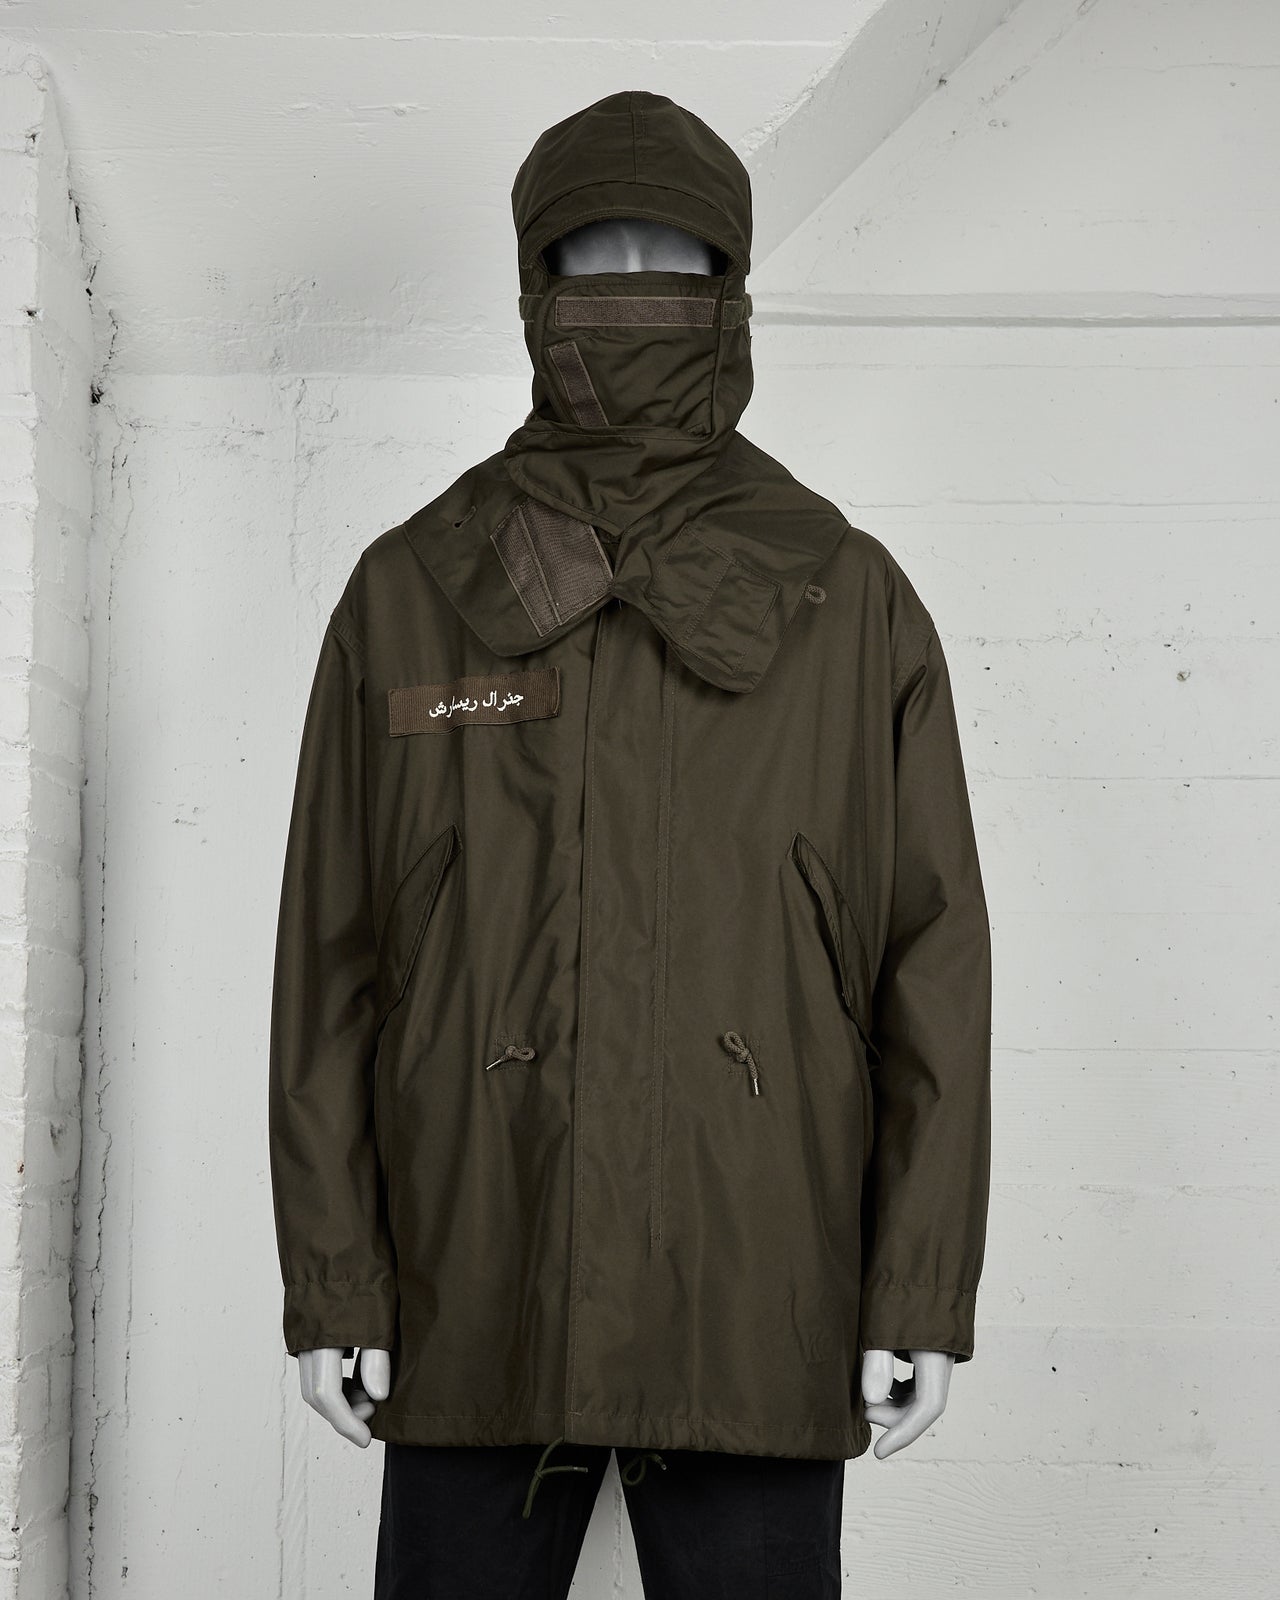 General Research Arabic Parka Jacket - AW01